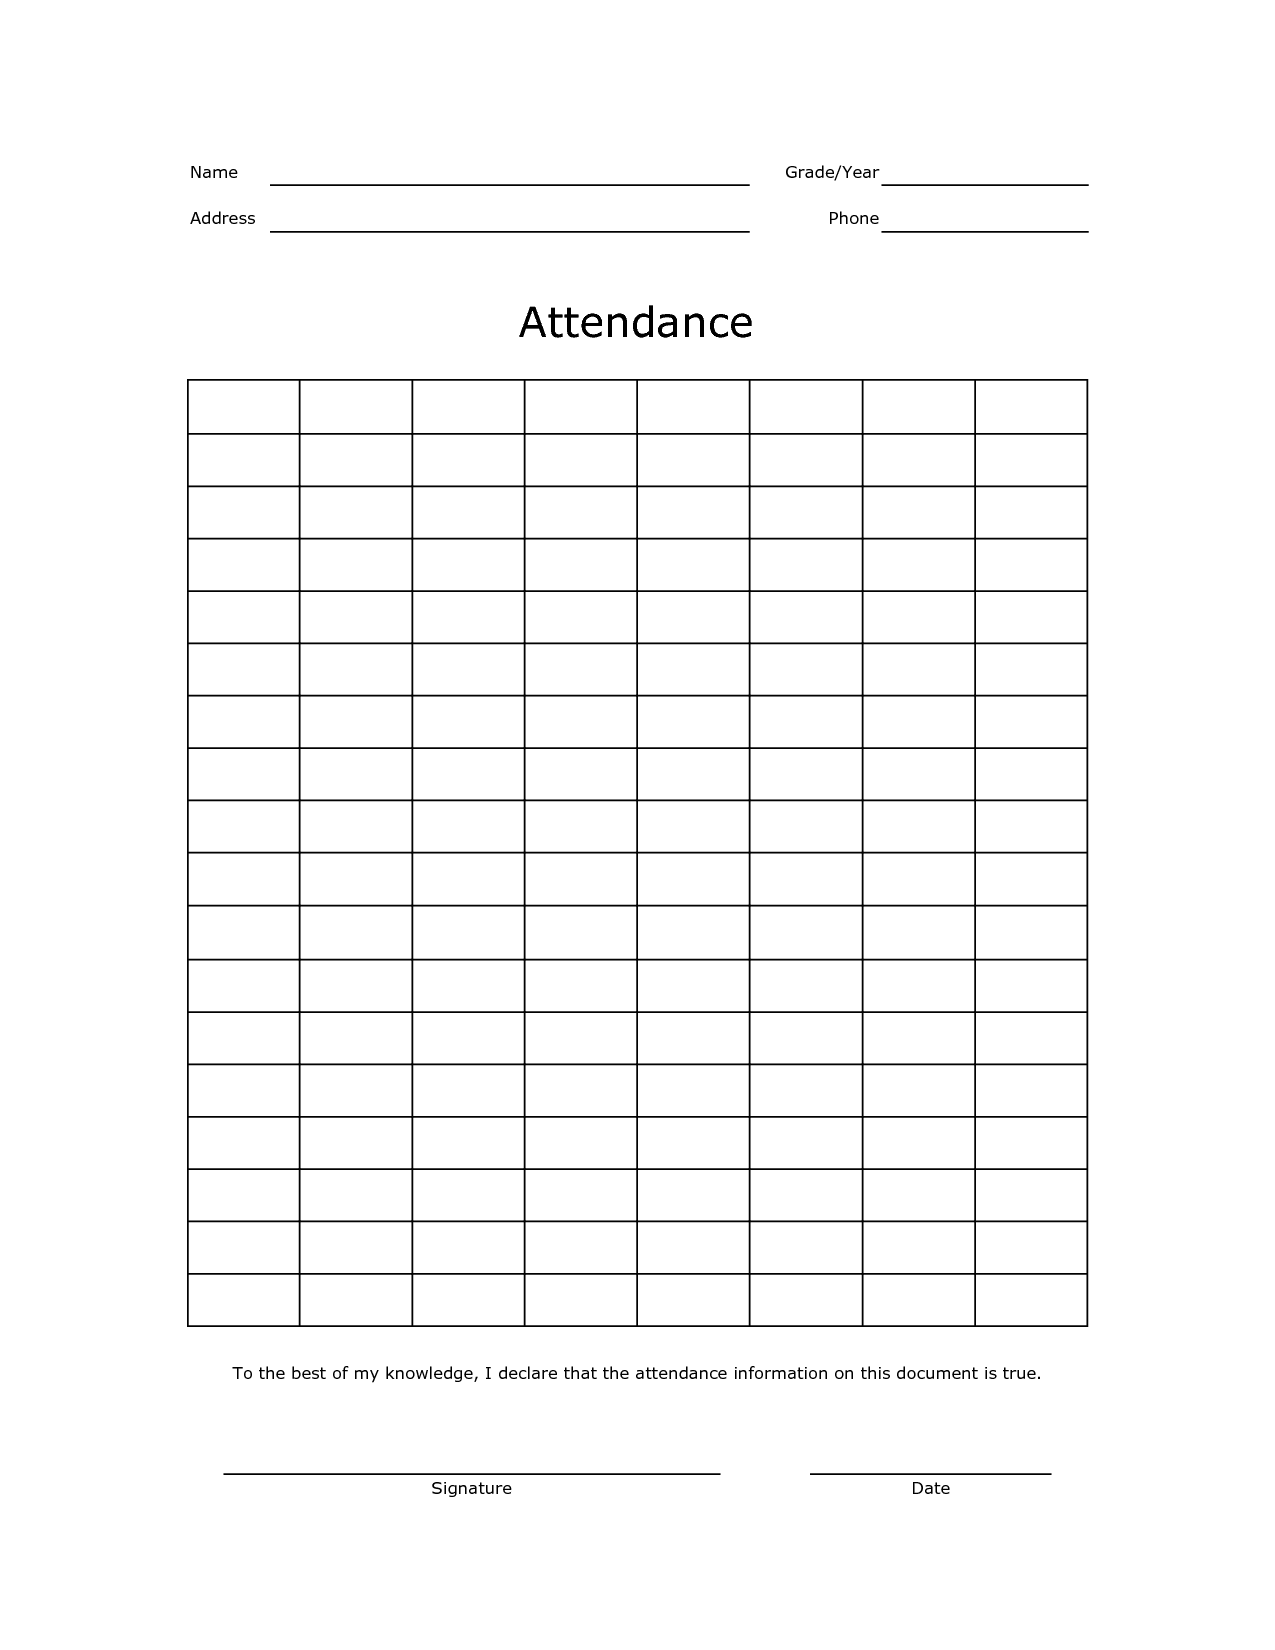 5 Best Images Of Free Printable Attendance Roster Forms School 